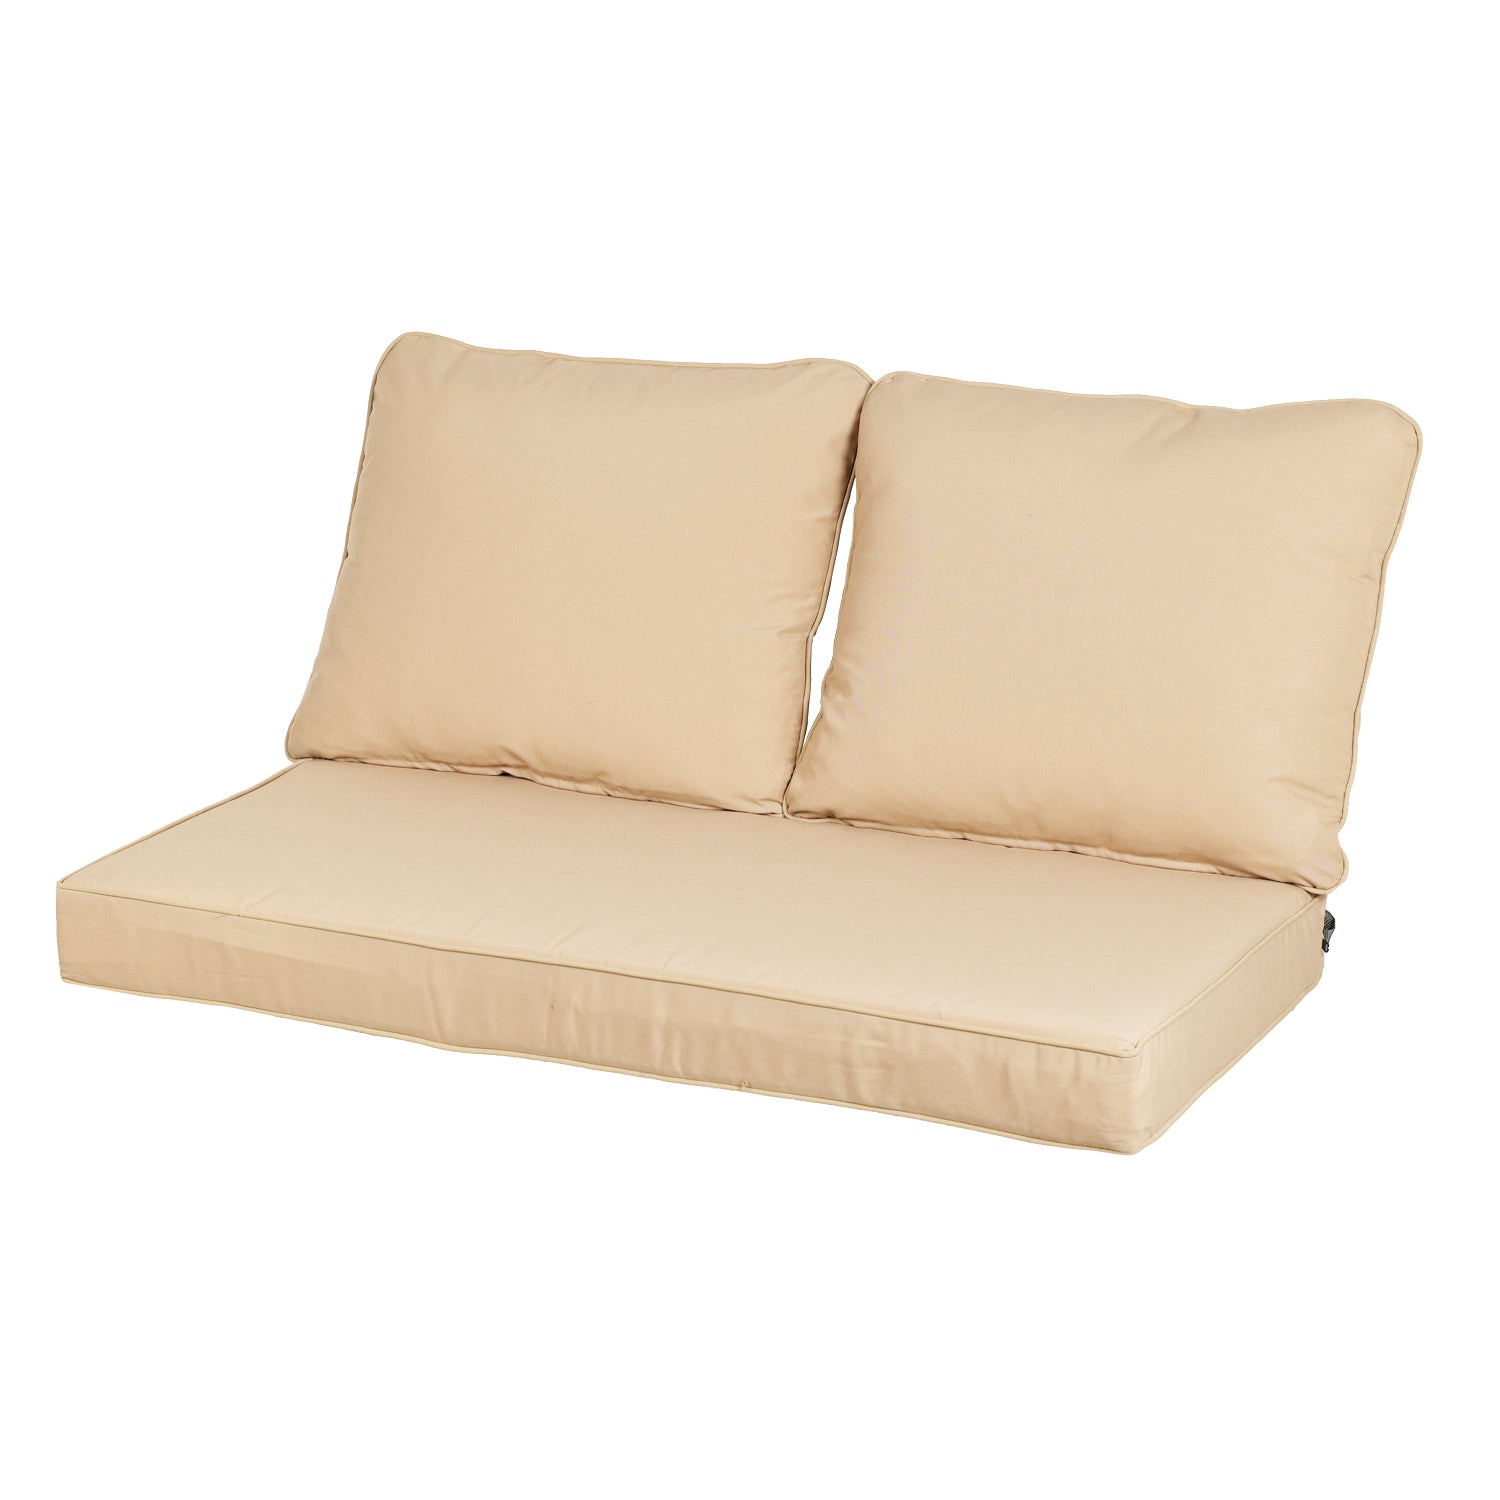 Loveseat Cushions Set 46.5"x24.4"x3.9" Deep Seating Bench Chair Cushions with Back Pillows, Seat Cushion, and Dust Jacket for Indoor and Outdoor  - 3 Piece Set - Aoodor LLC